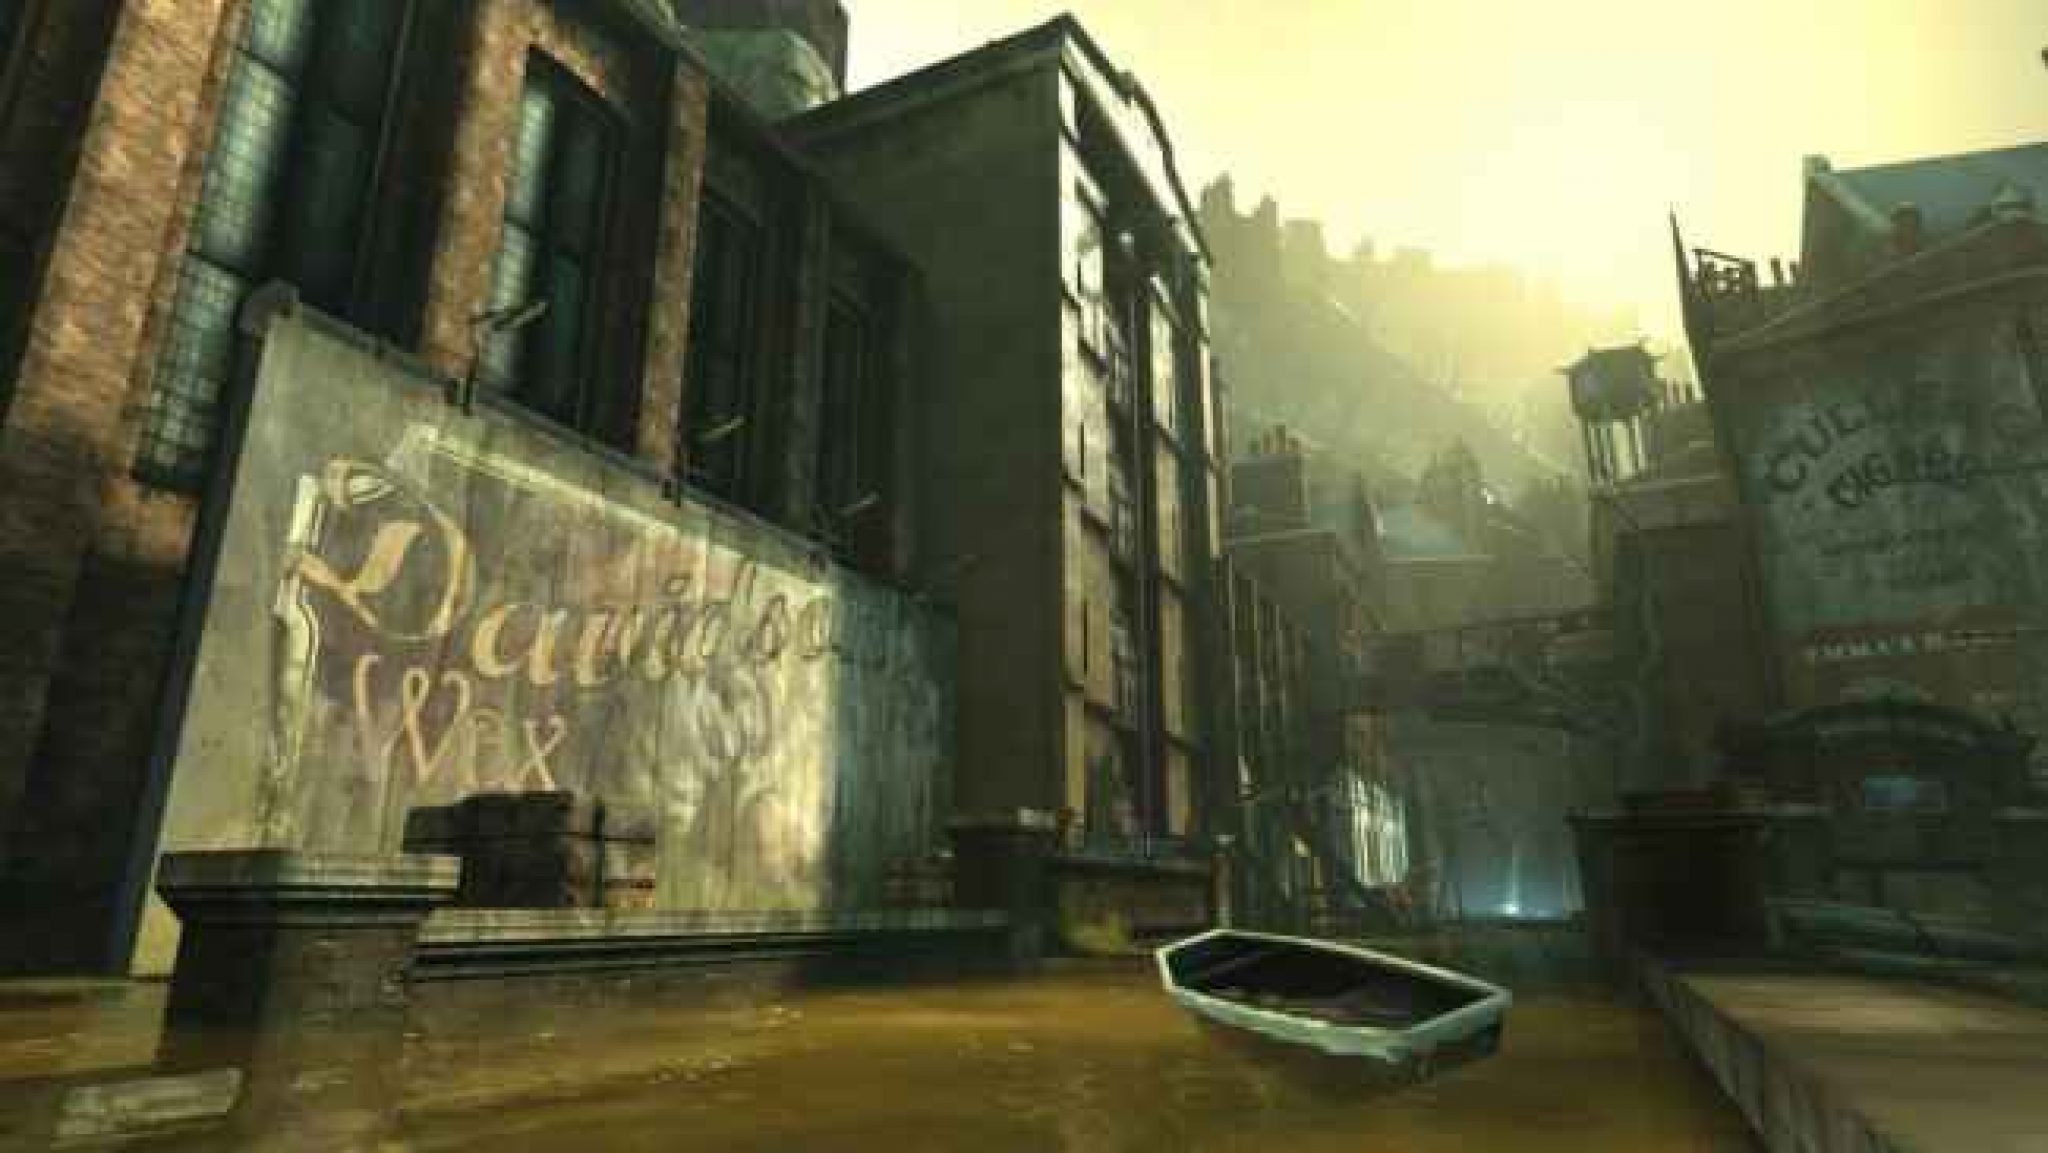 download xbox one dishonored for free